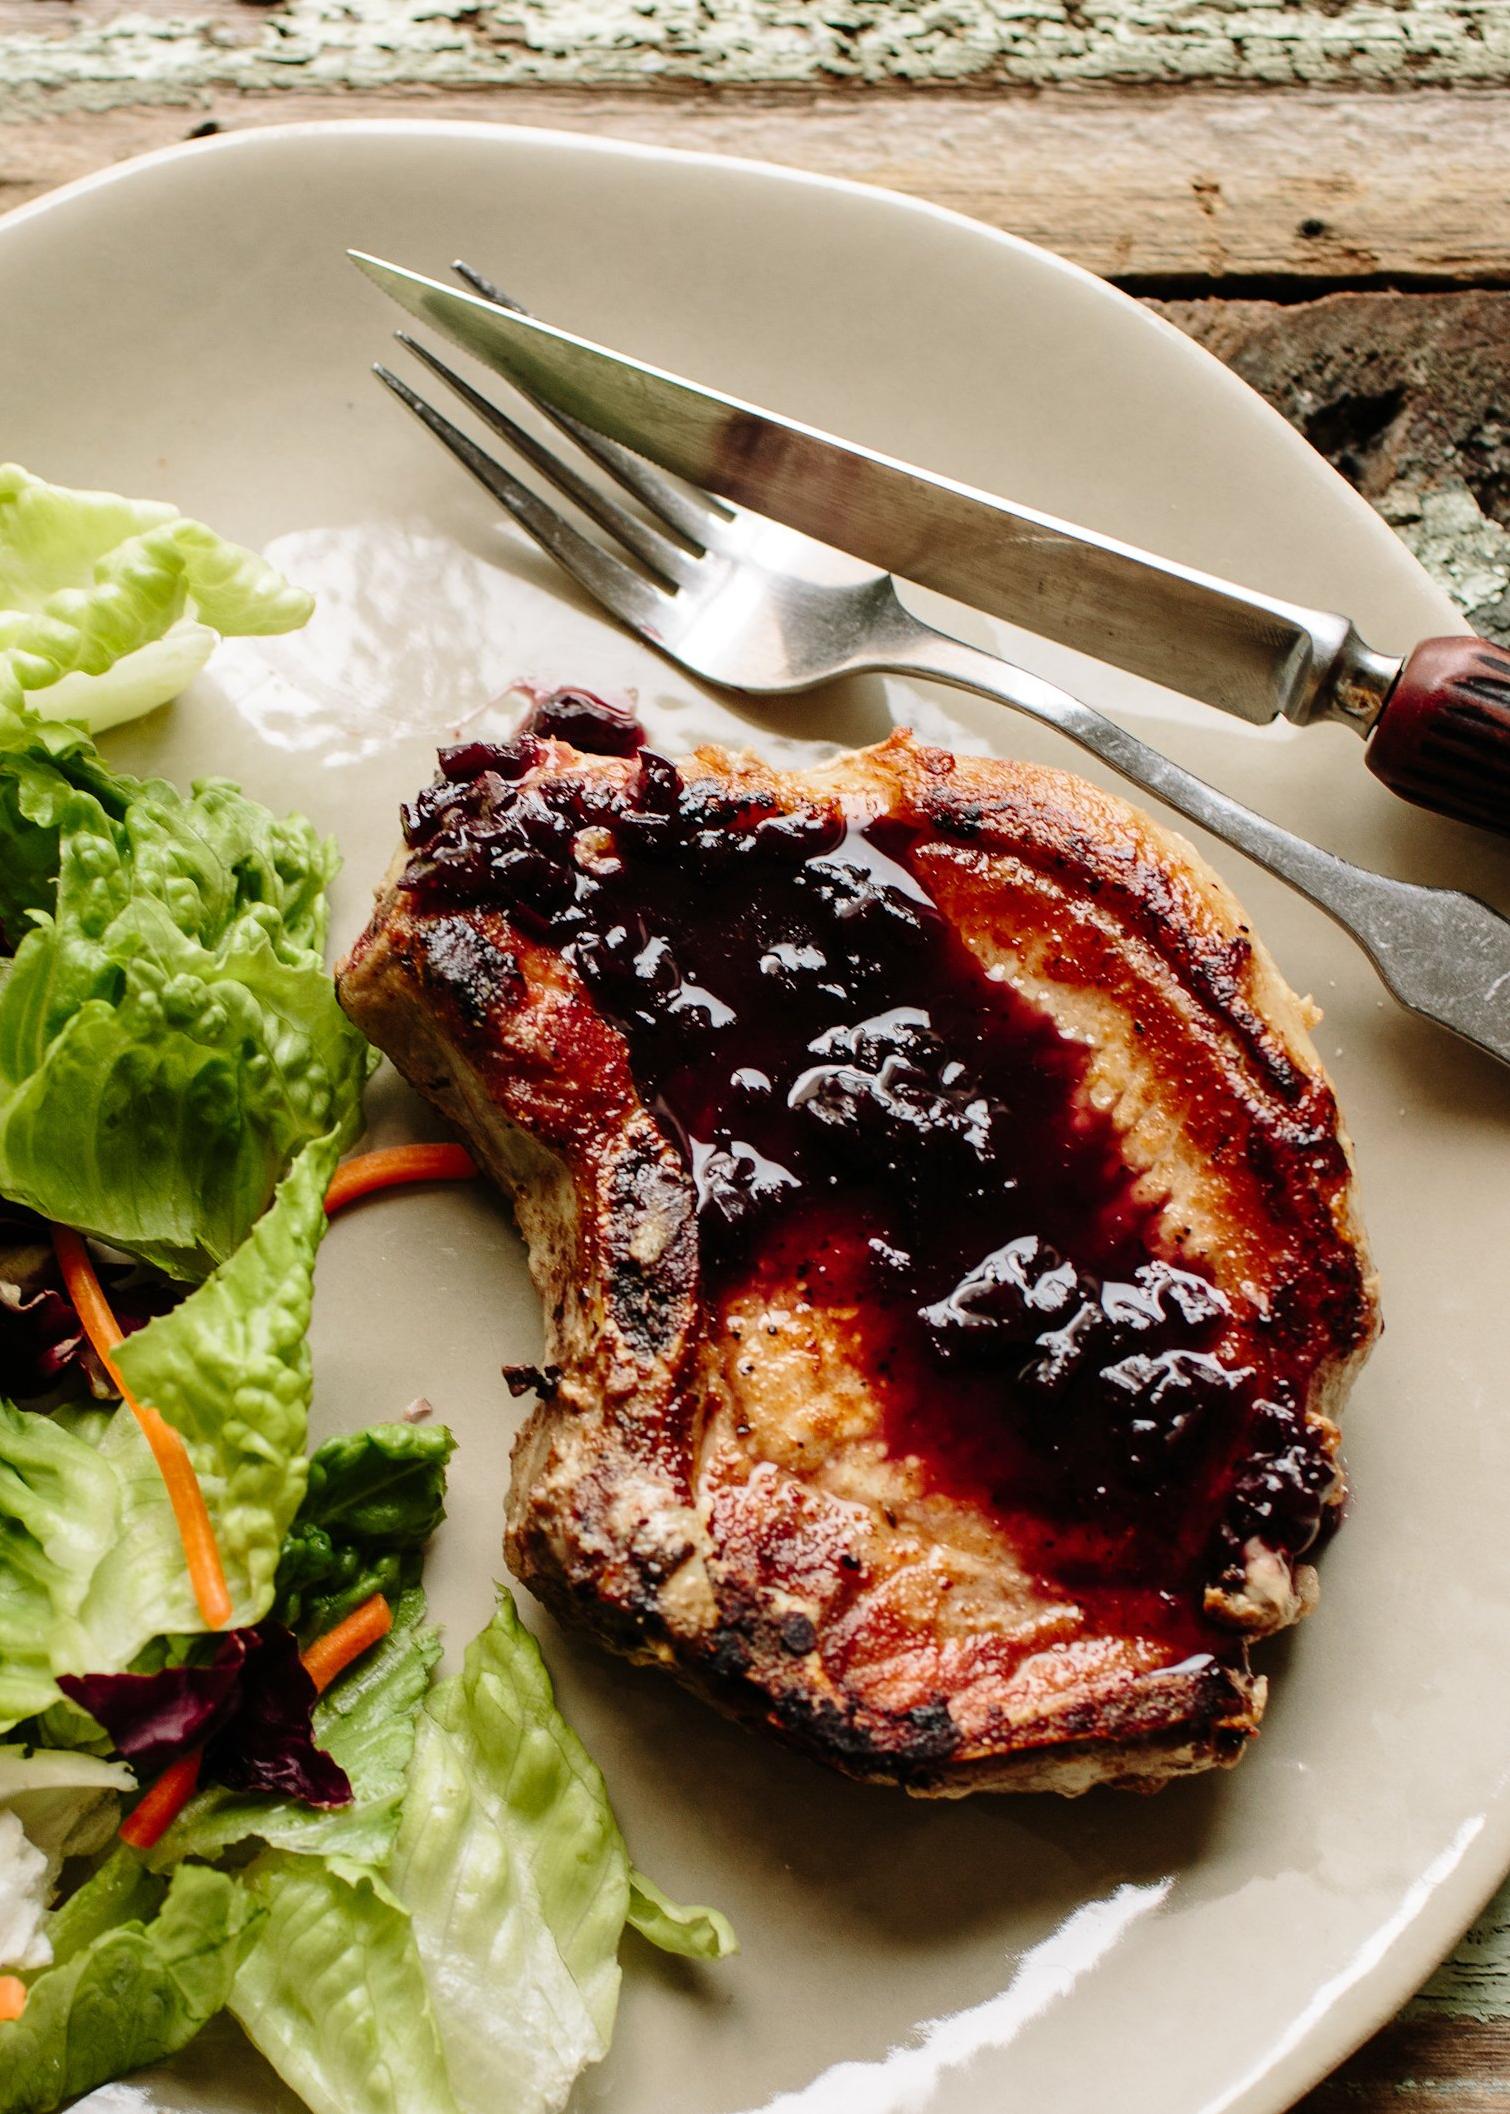  The savory pork cutlets and wine sauce are a match made in heaven.